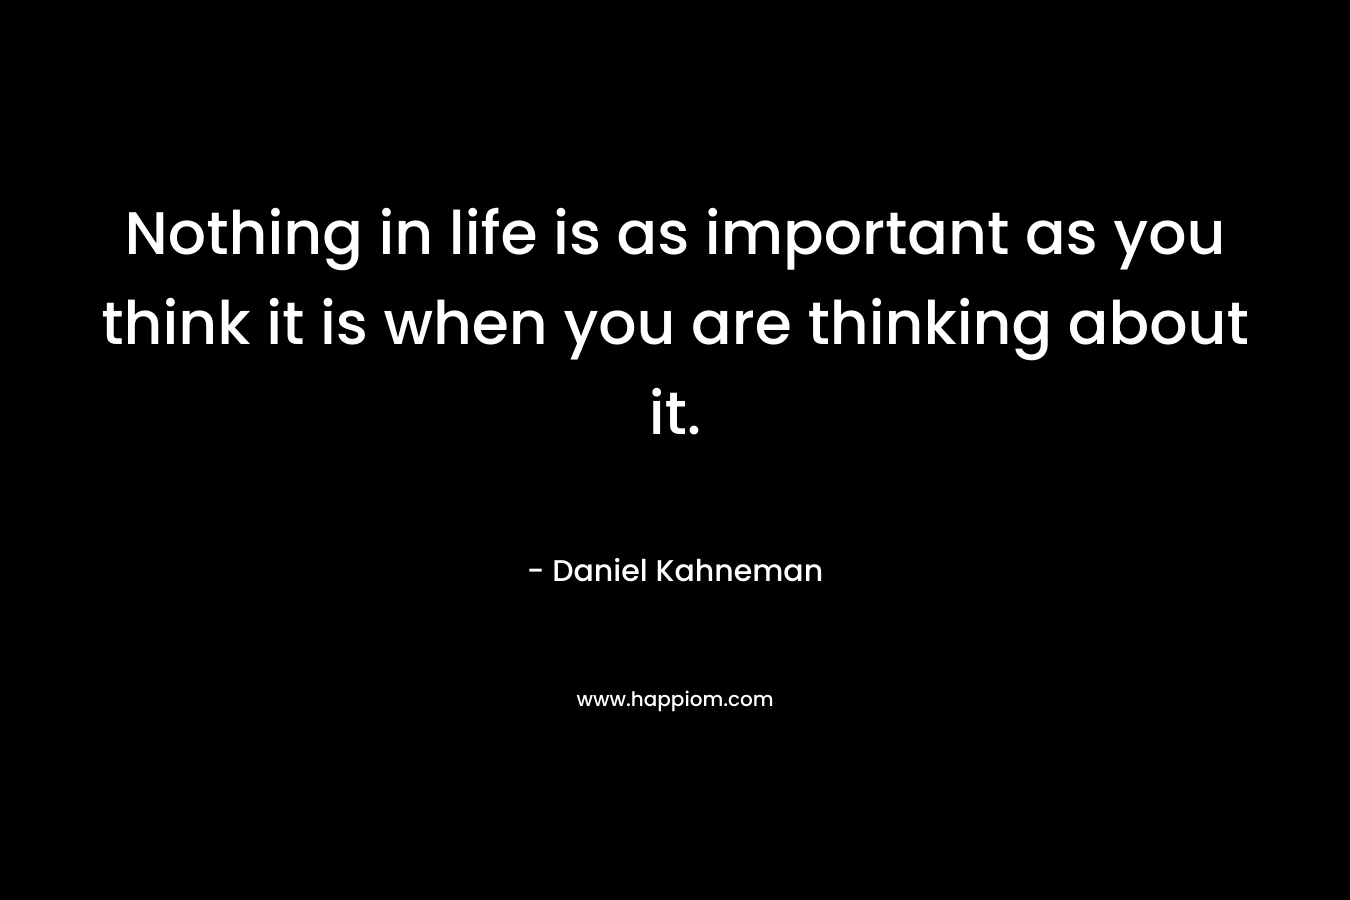 Nothing in life is as important as you think it is when you are thinking about it. – Daniel Kahneman